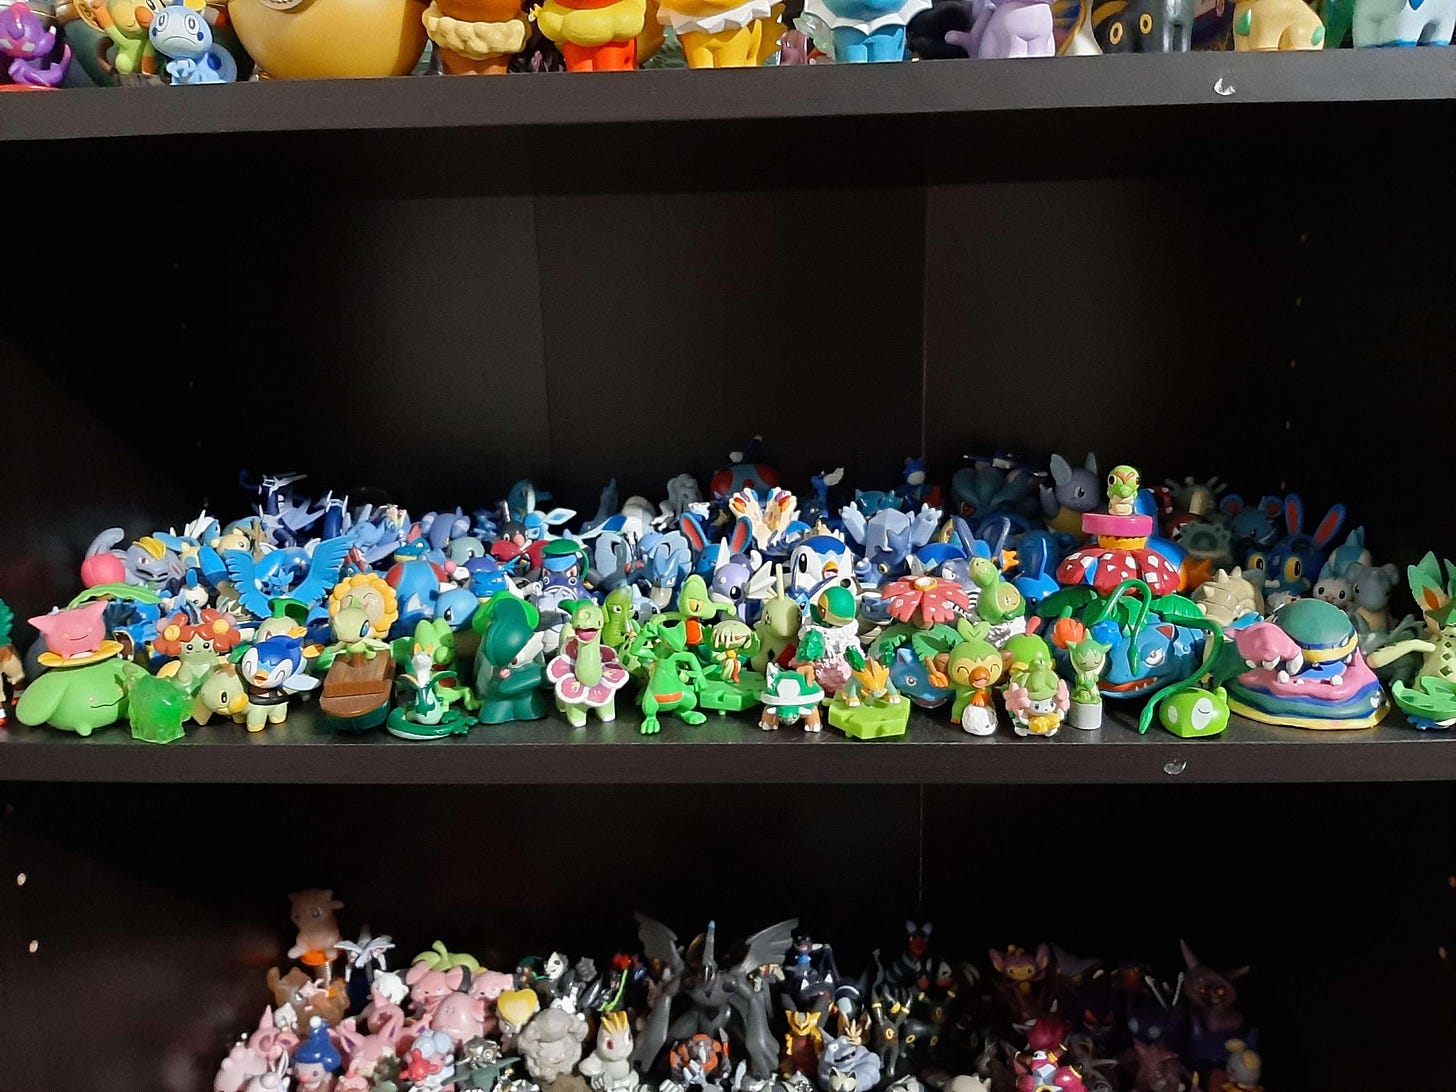 Miles has a tremendous number of Pokémon figures in his collection, there are so many in this picture alone that it's impossible to list each one!